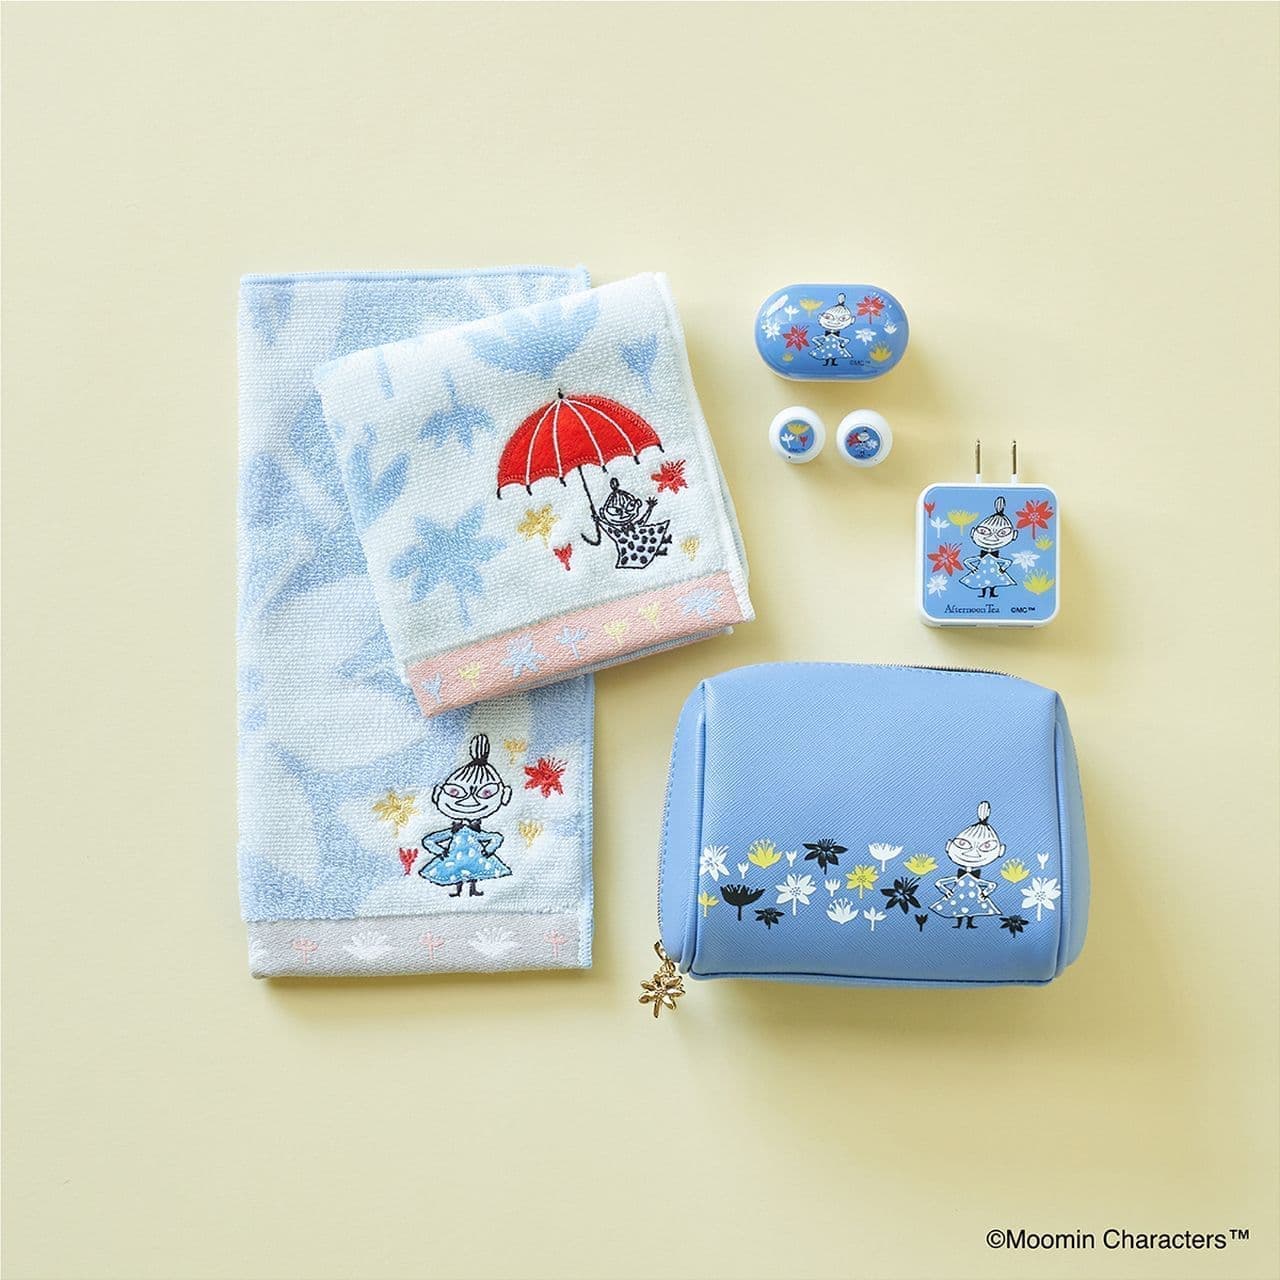 Afternoon Tea LIVING ムーミン絵本デザイン「LITTLE MY collection」夏アイテム